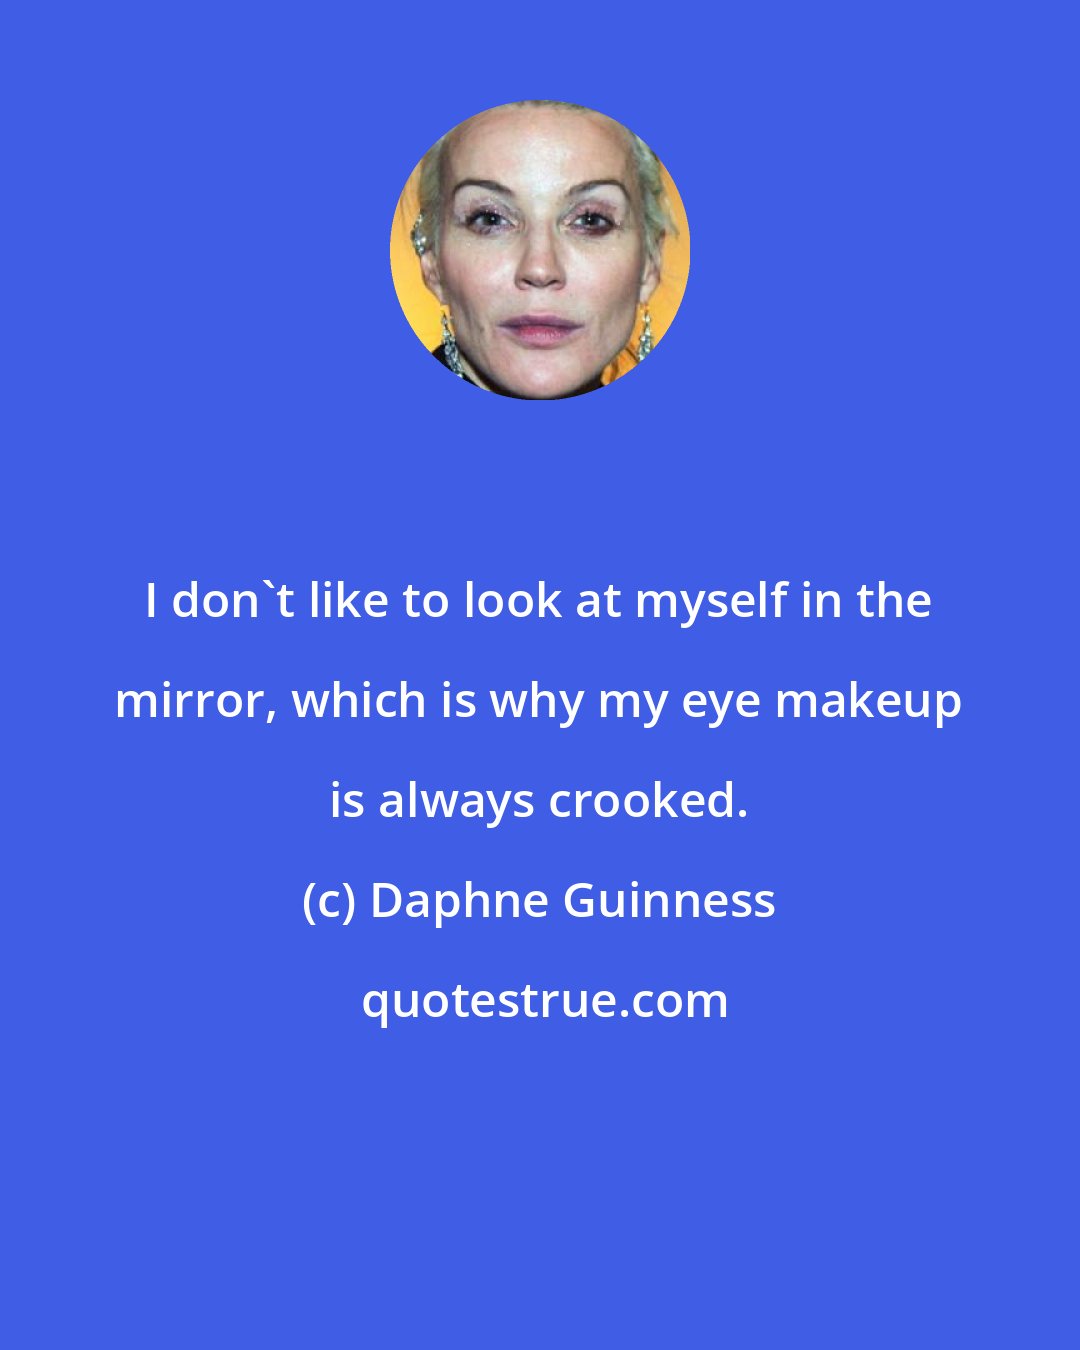 Daphne Guinness: I don't like to look at myself in the mirror, which is why my eye makeup is always crooked.